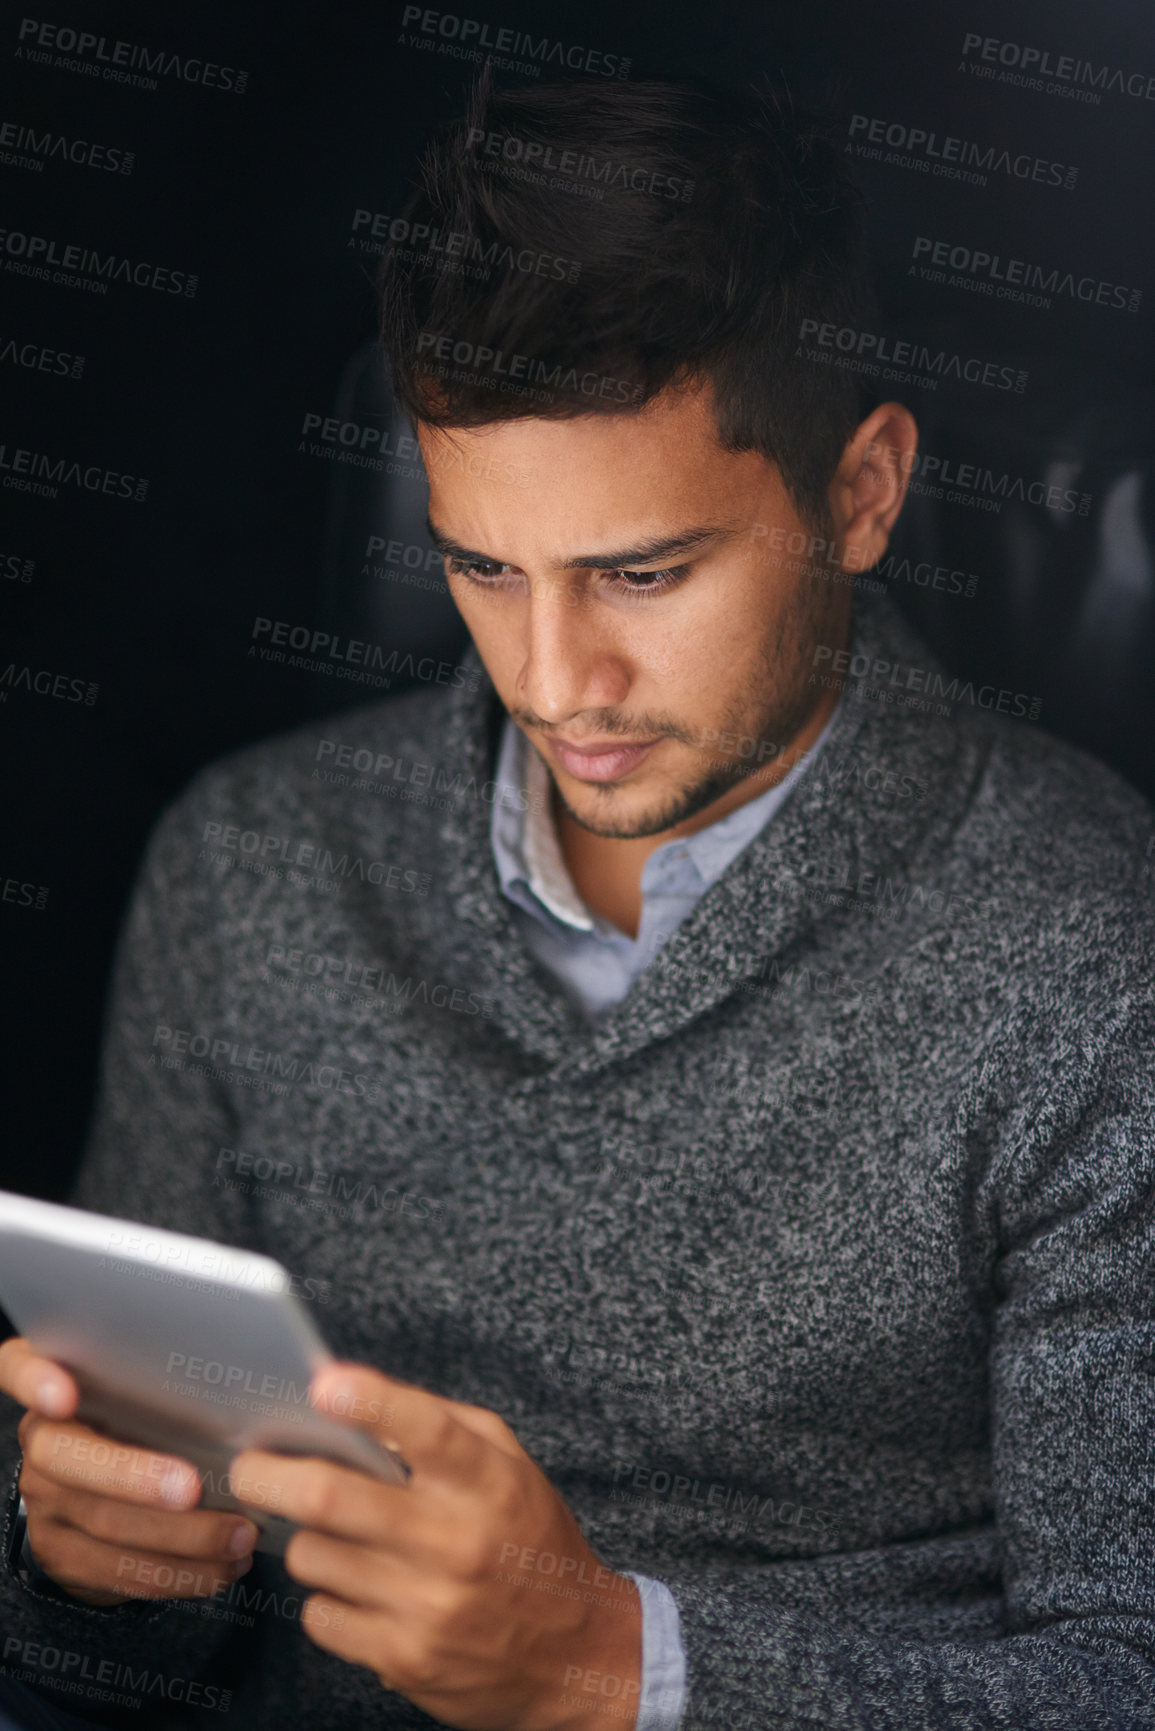 Buy stock photo Shot of a young man using a digital tablet in the dark